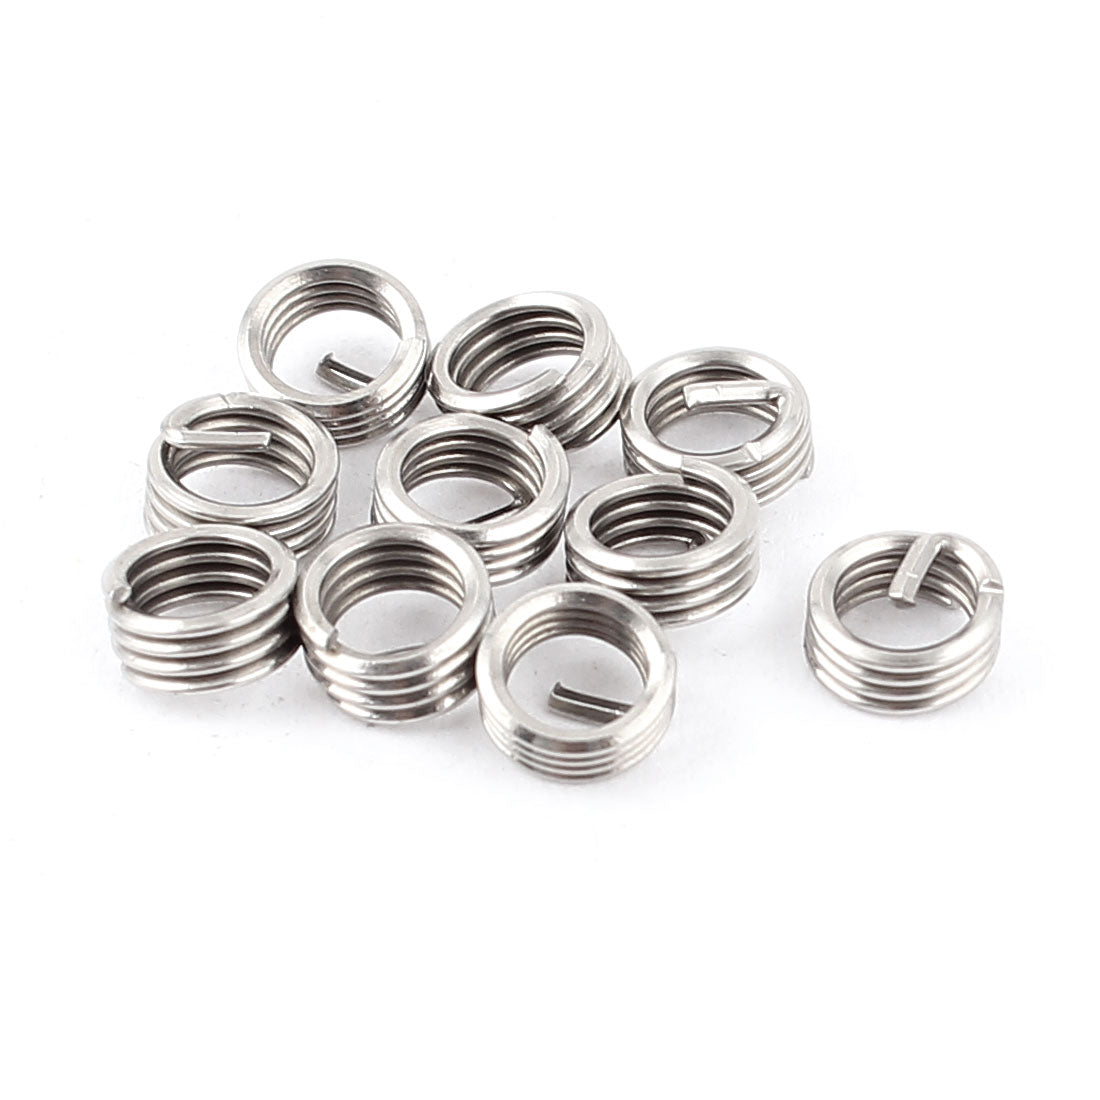 uxcell Uxcell 10Pcs 304 Stainless Steel Helicoil Wire Thread Repair Inserts M4 x 0.7mm x 1D